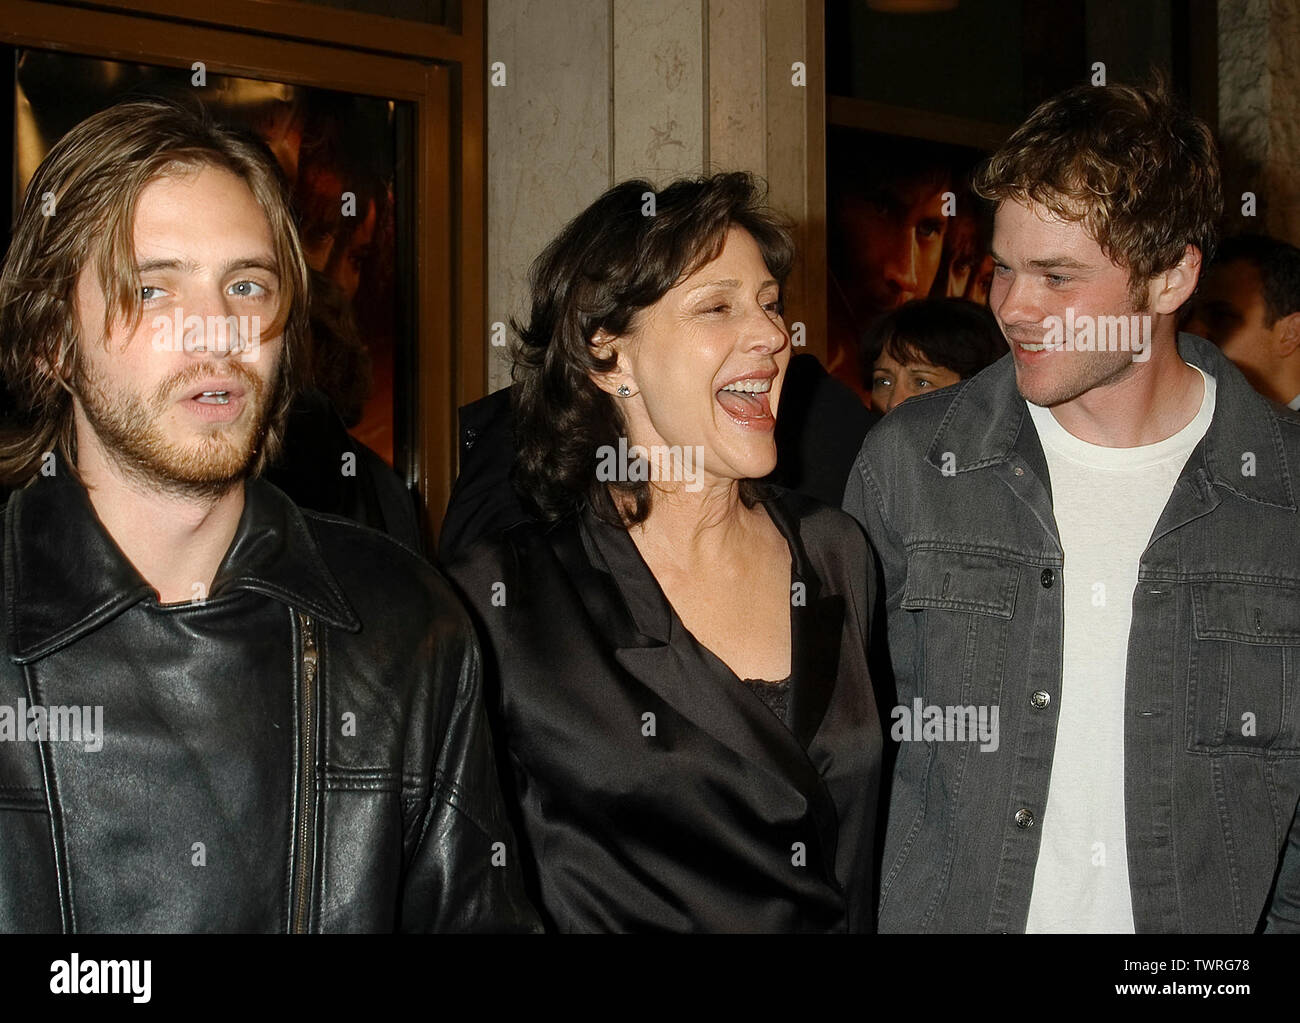 Aaron Stanford, Lauren Schuler Donner & Shawn Ashmore at the World Premiere of 'Timeline' at the Mann's National Theater in Hollywood, CA. The event took place on Wednesday, November 19, 2003.  Photo credit: SBM / PictureLux File Reference # 33790-2933SMBPLX  For Editorial Use Only -  All Rights Reserved Stock Photo